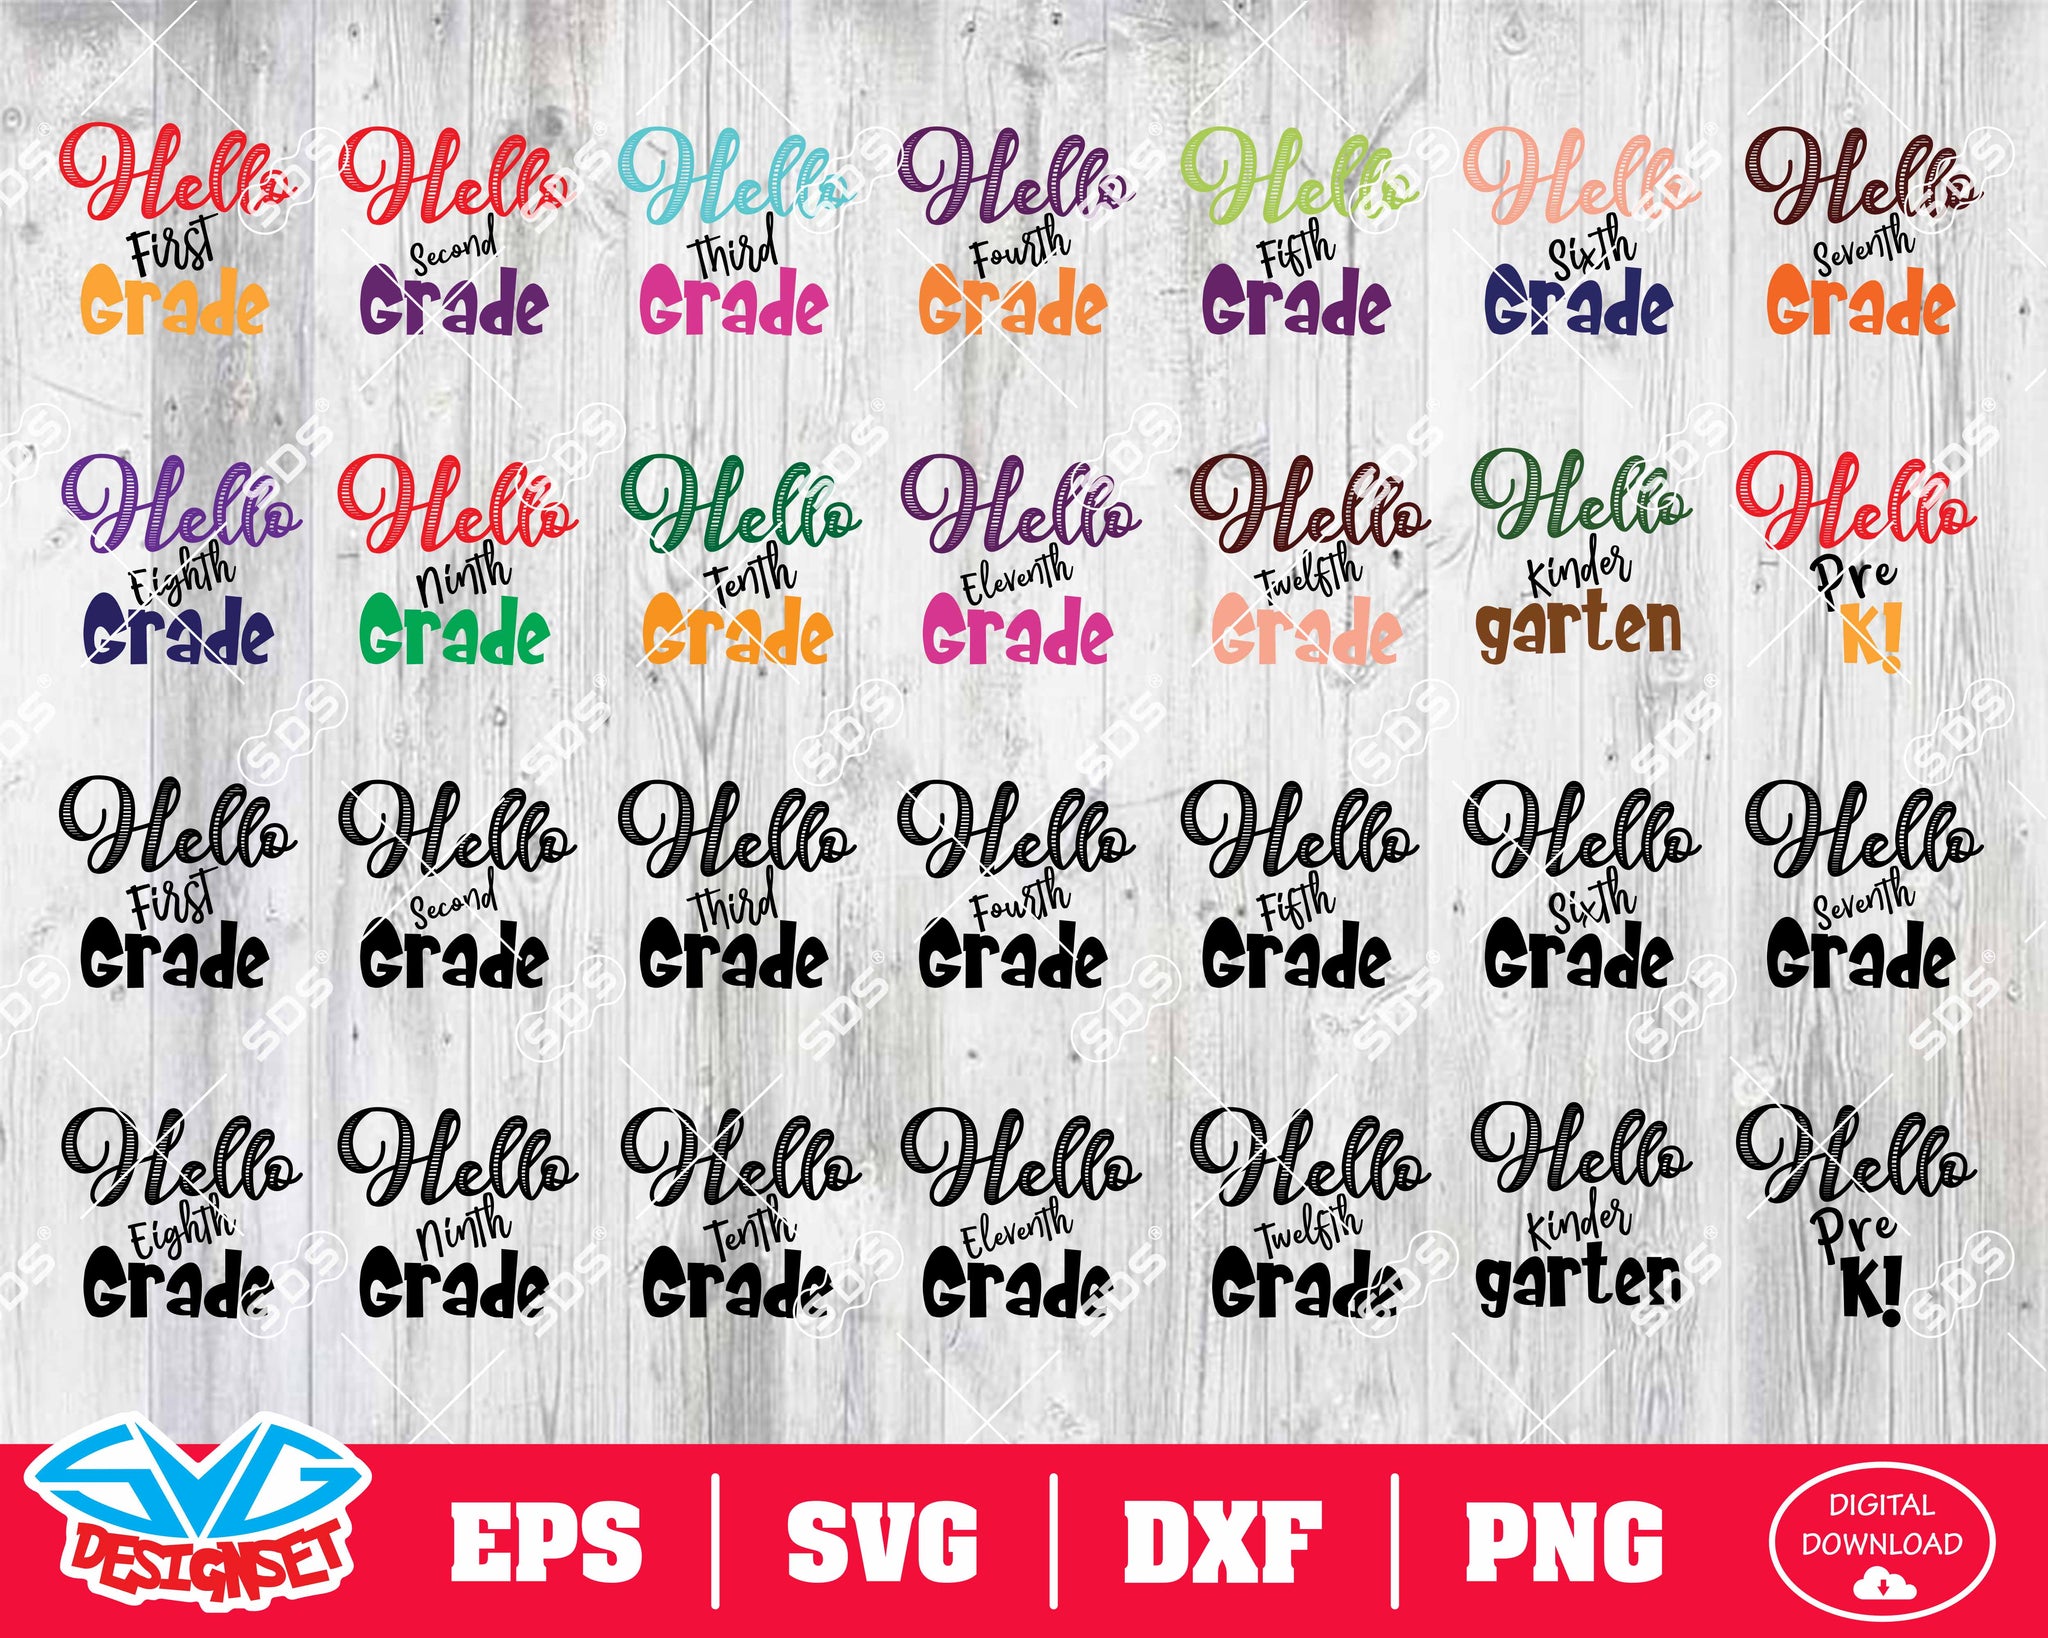 Back to School Svg, Dxf, Eps, Png, Clipart, Silhouette and Cutfiles #4 - SVGDesignSets